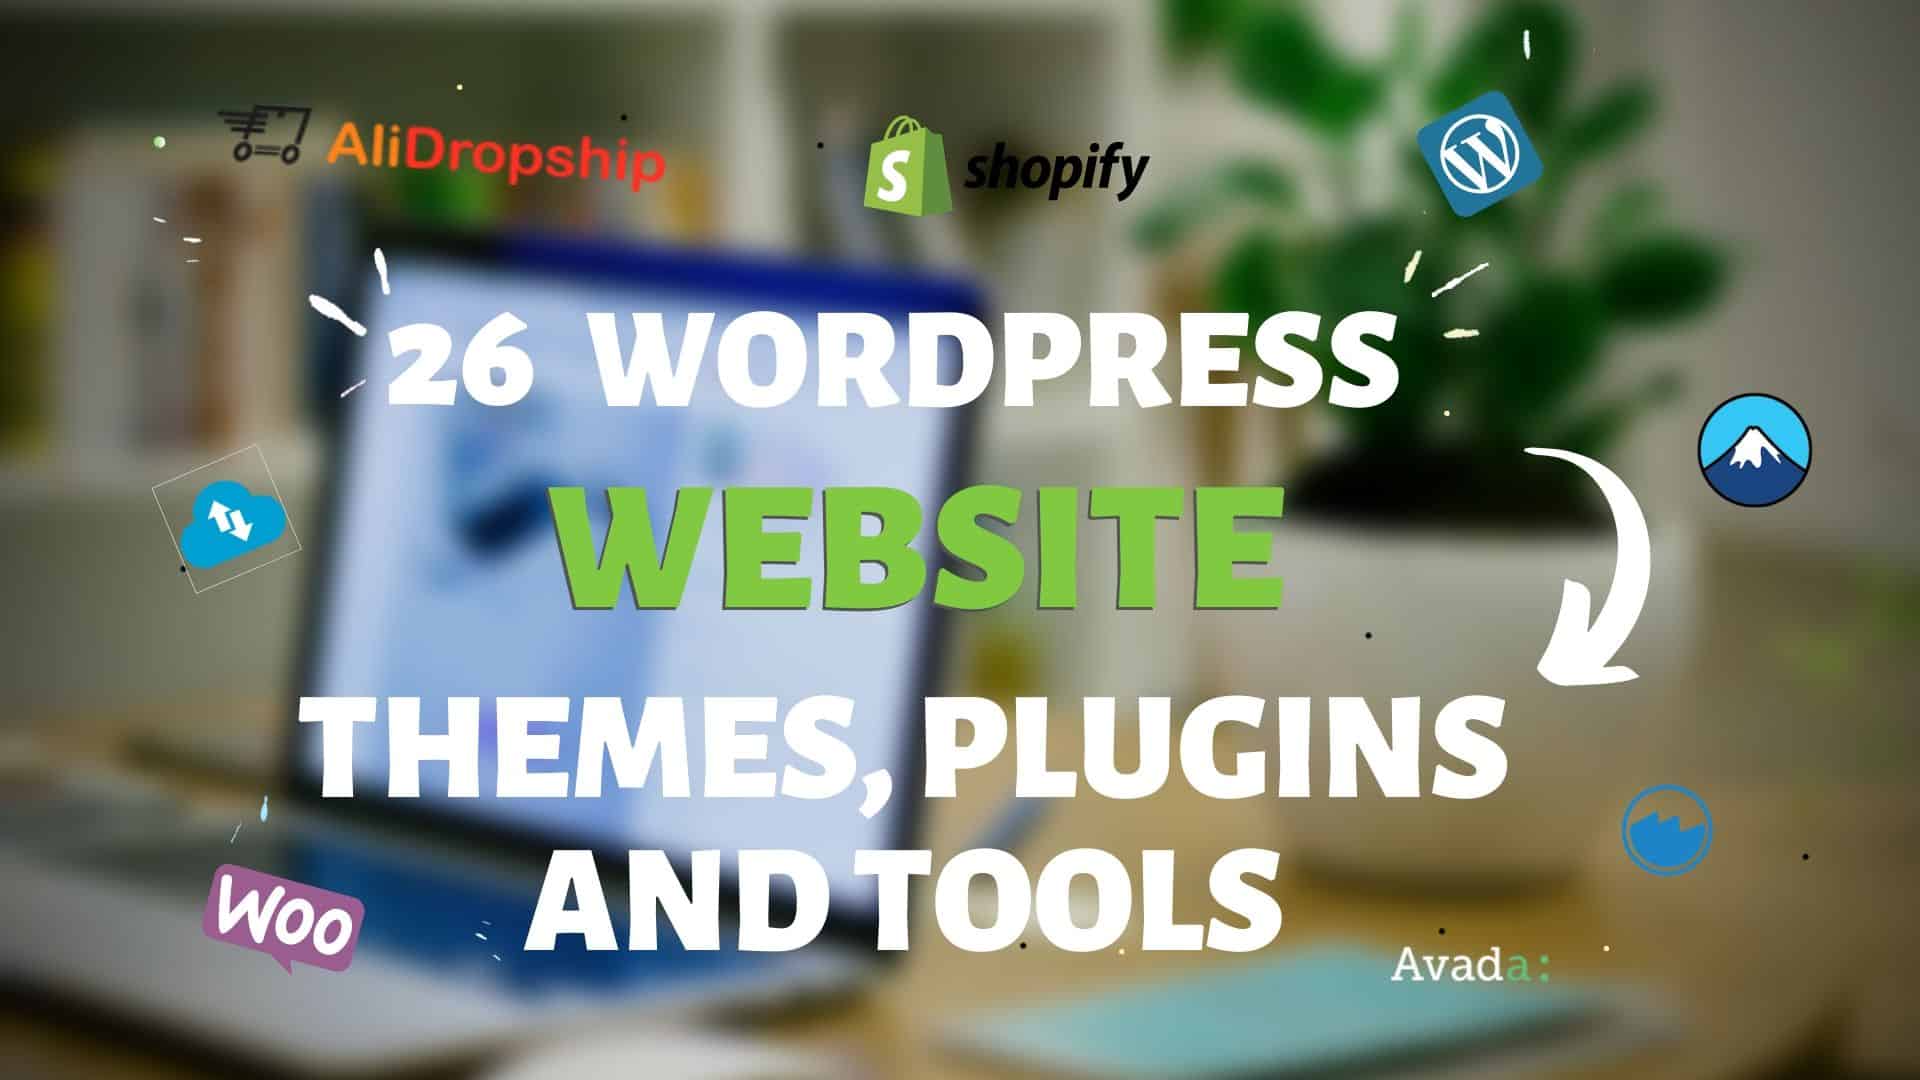 26 Wordpress Website Themes, Plugins and Tools You Must Use To Build or Manage Your Wordpress Website